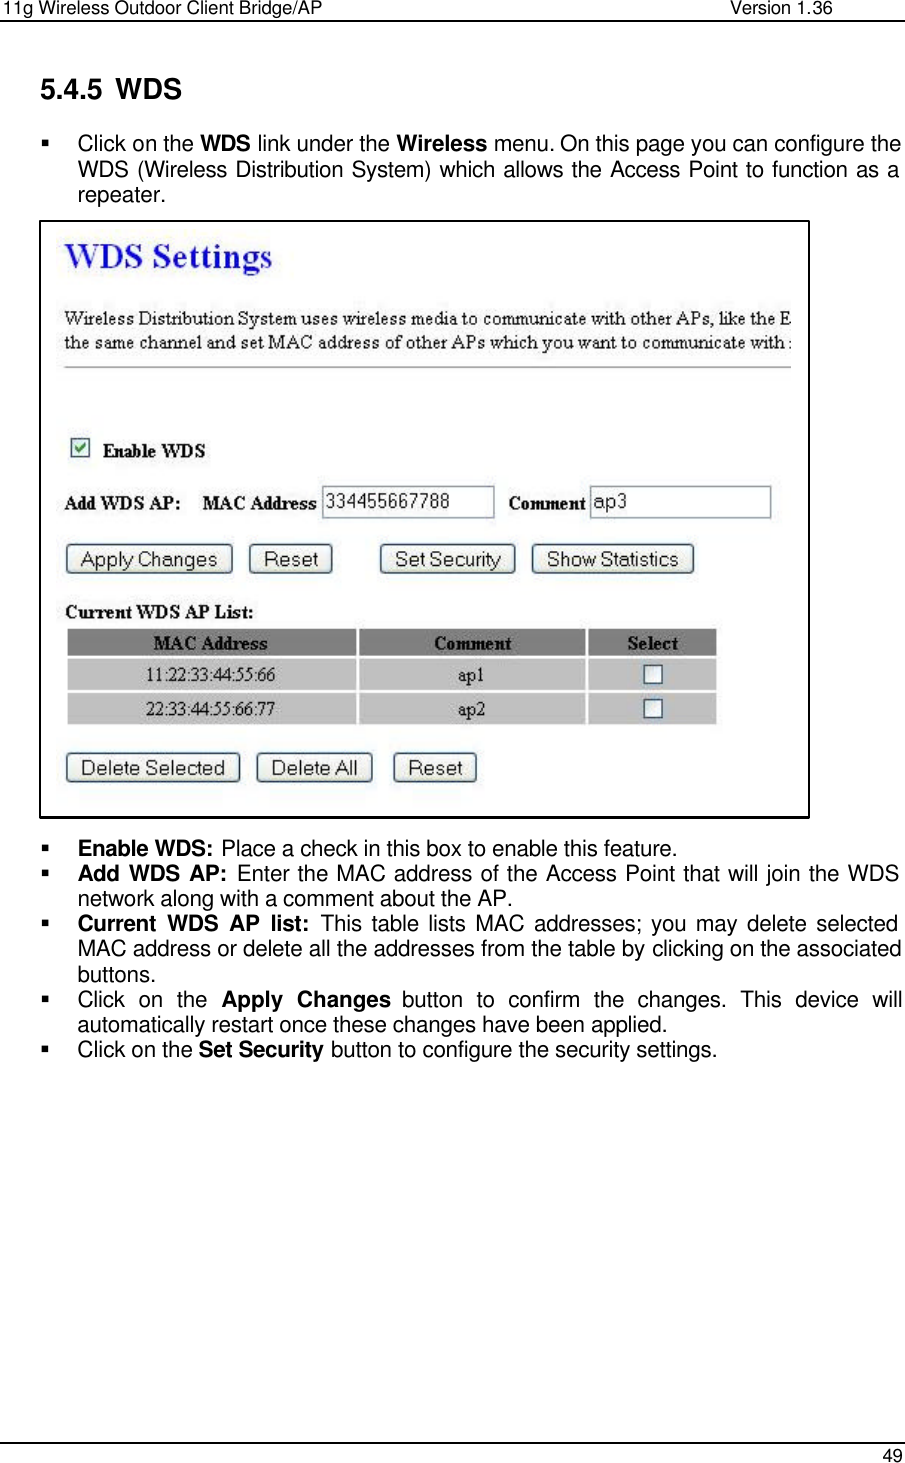 11g Wireless Outdoor Client Bridge/AP                Version 1.36    49  5.4.5 WDS § Click on the WDS link under the Wireless menu. On this page you can configure the WDS (Wireless Distribution System) which allows the Access Point to function as a repeater.                           § Enable WDS: Place a check in this box to enable this feature.  § Add WDS AP: Enter the MAC address of the Access Point that will join the WDS network along with a comment about the AP.  § Current WDS AP list: This table lists MAC addresses; you may delete selected MAC address or delete all the addresses from the table by clicking on the associated buttons.  § Click on the Apply Changes button to confirm the changes. This device will automatically restart once these changes have been applied.  § Click on the Set Security button to configure the security settings.                 